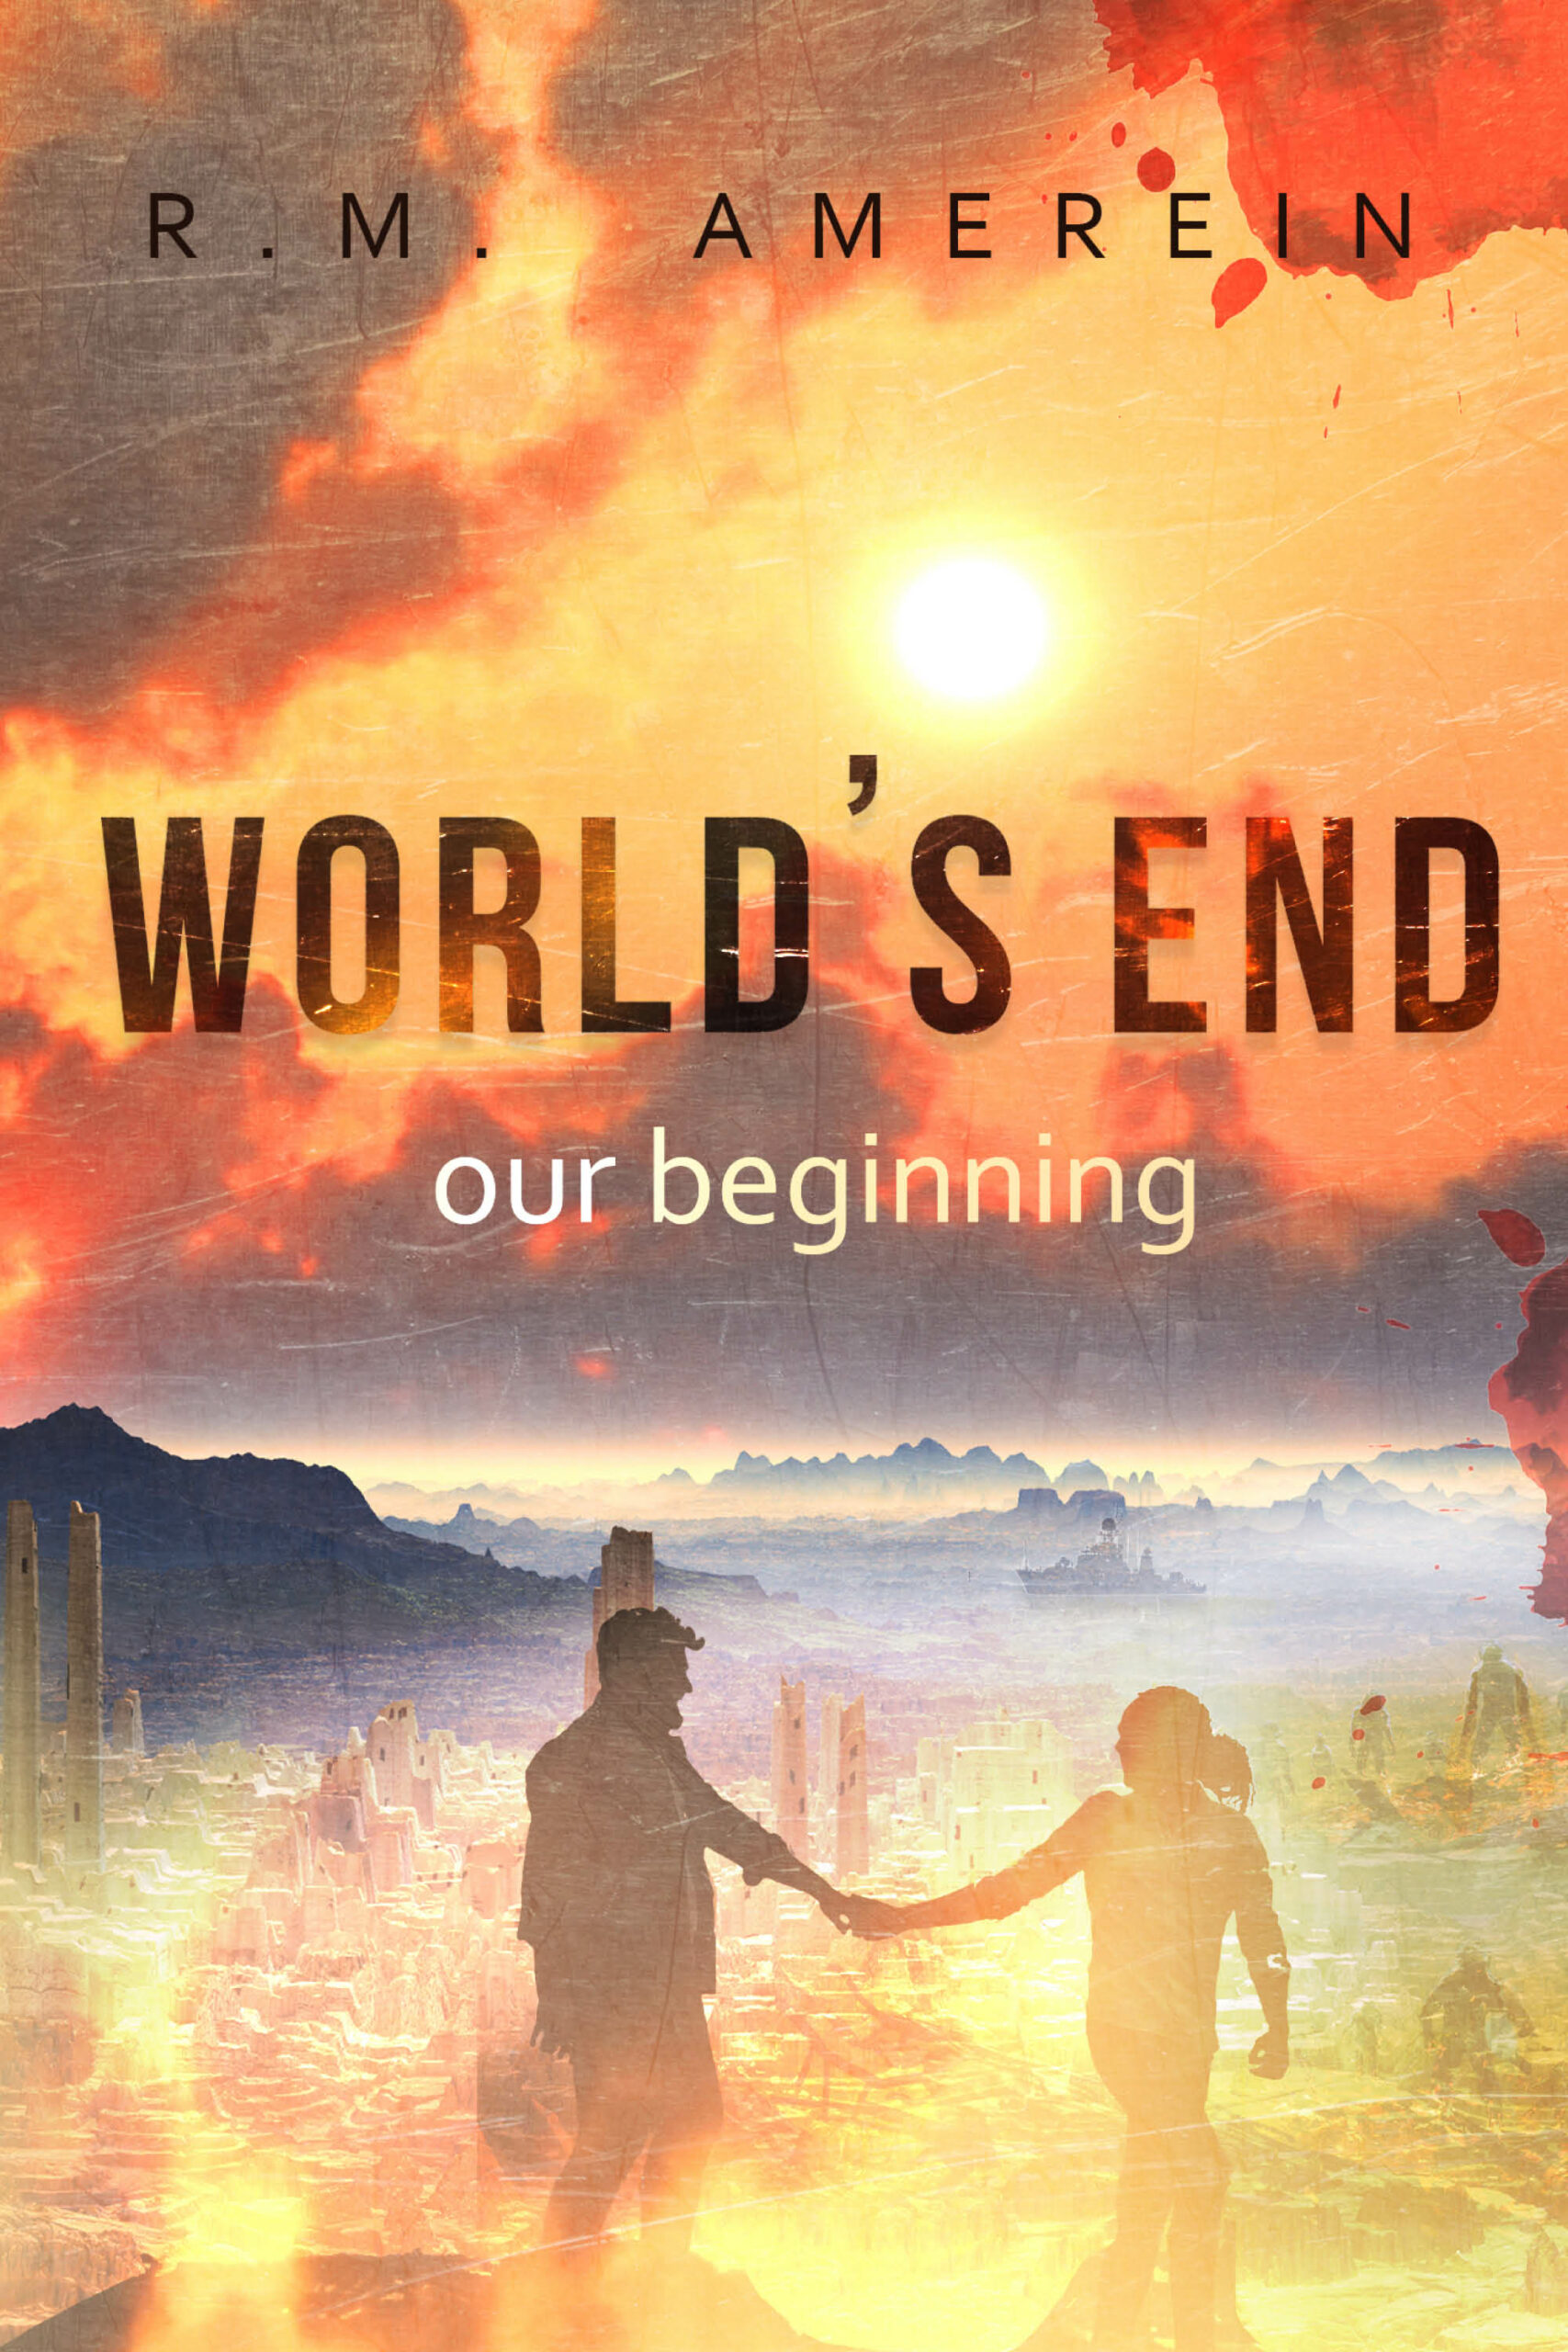 World’s end. Our beginning.